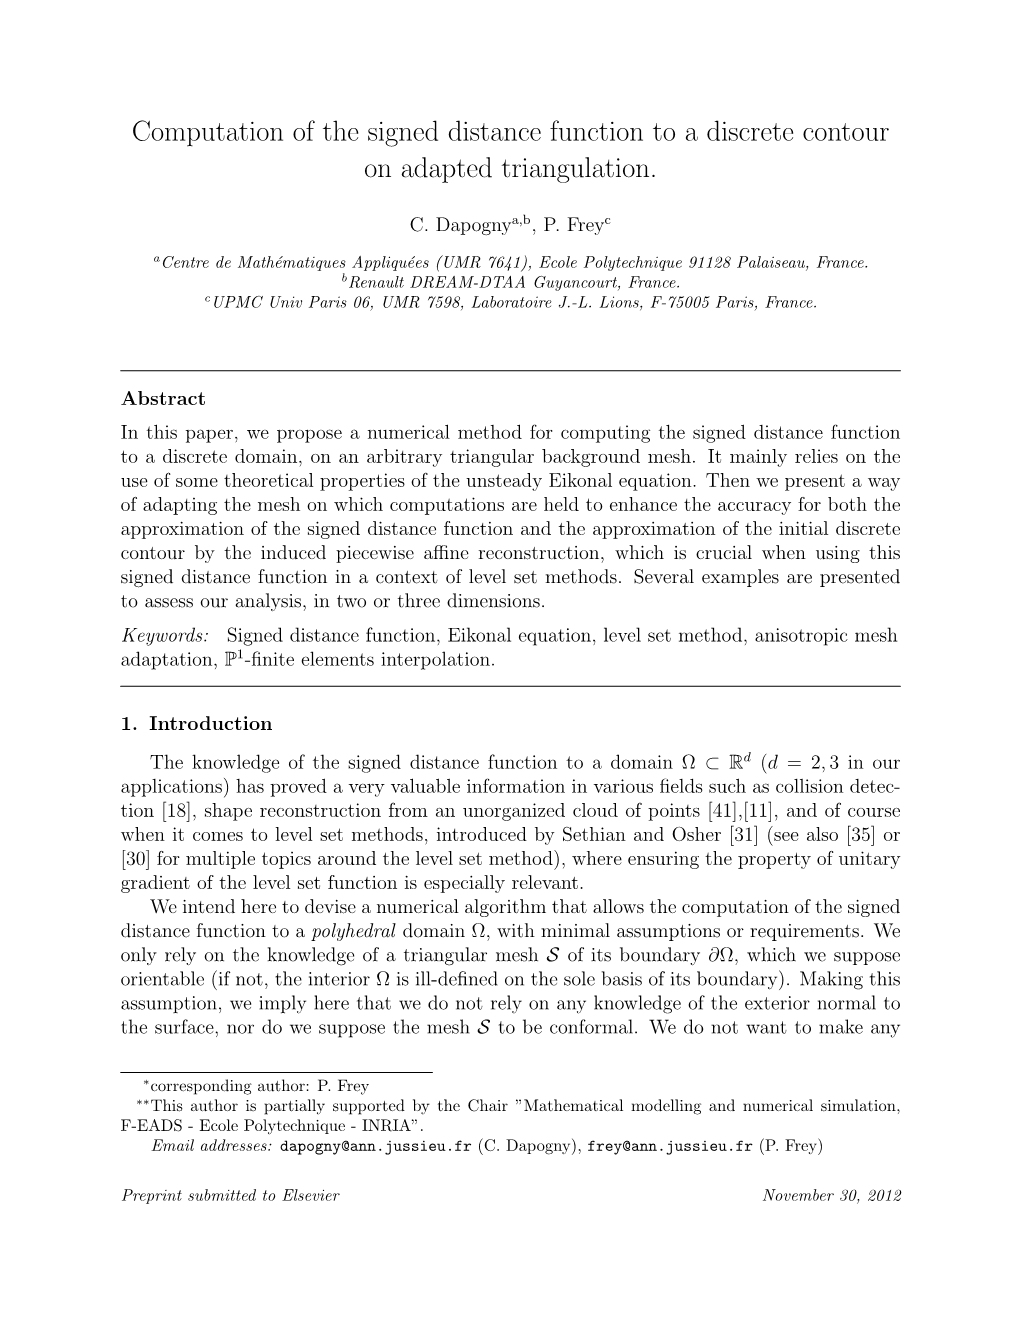 Computation of the Signed Distance Function to a Discrete Contour on Adapted Triangulation